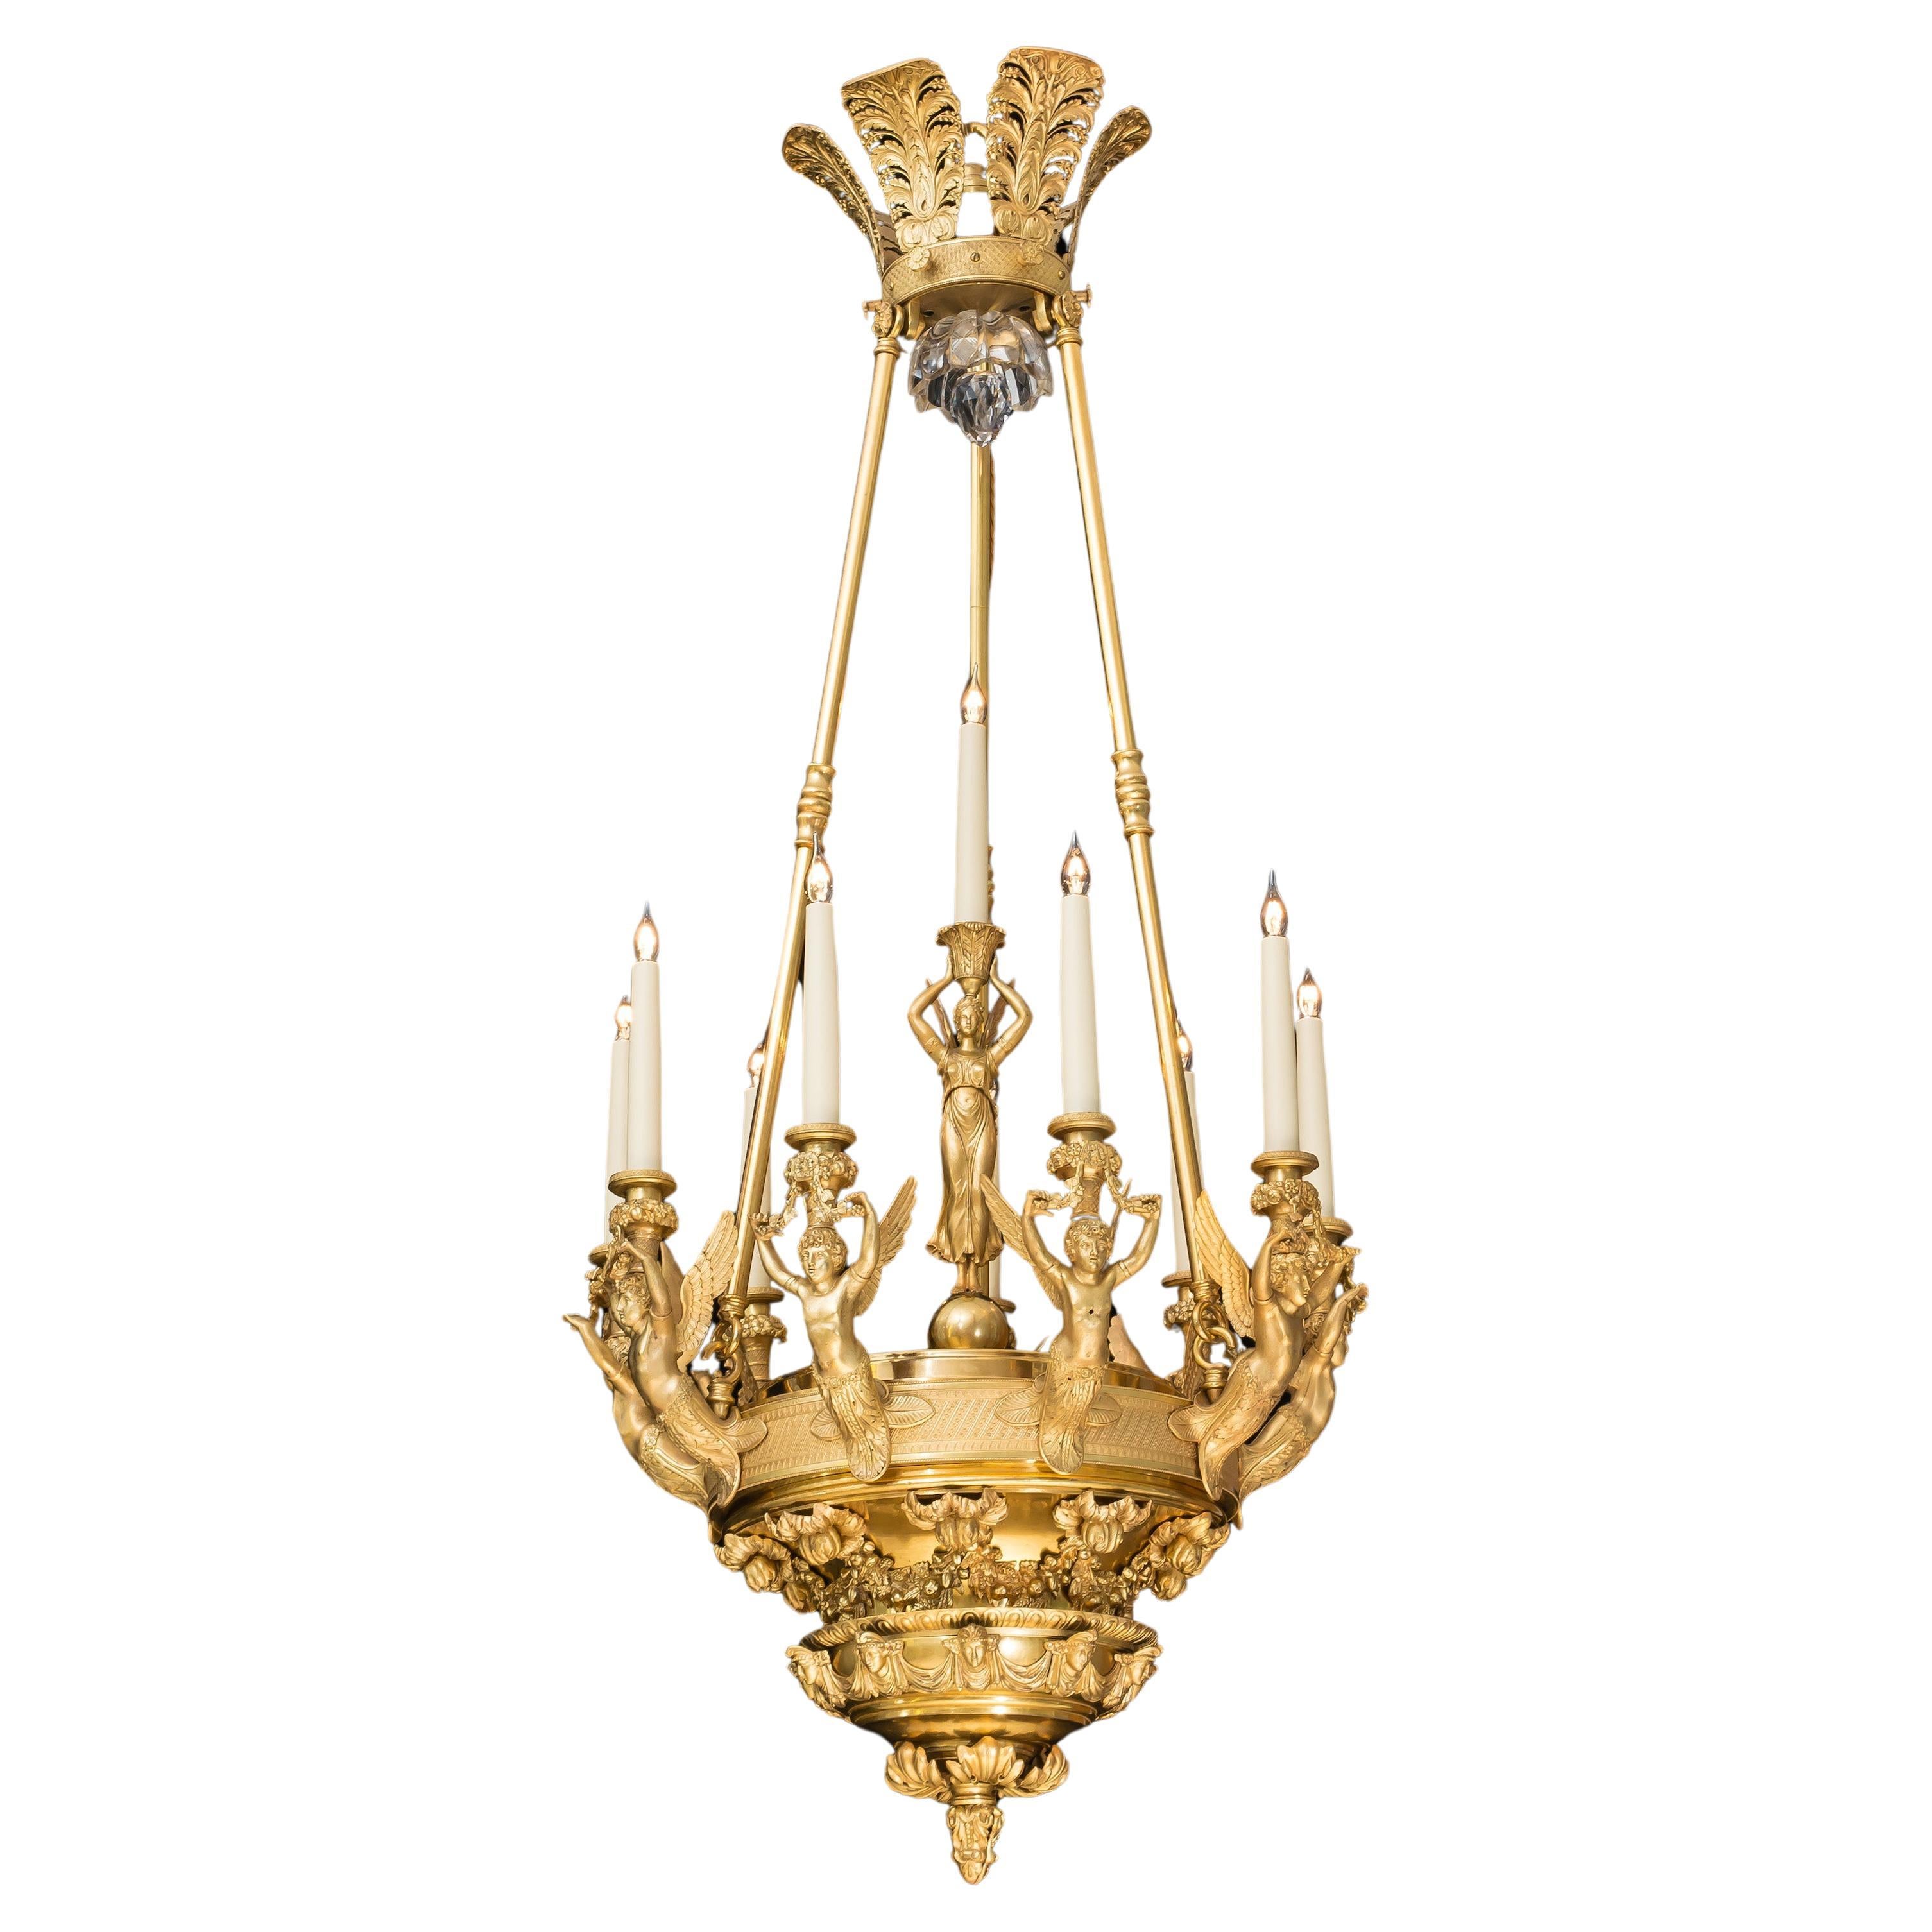 Antique French Empire Style Neoclassical Gilt Bronze 10-Light Chandelier